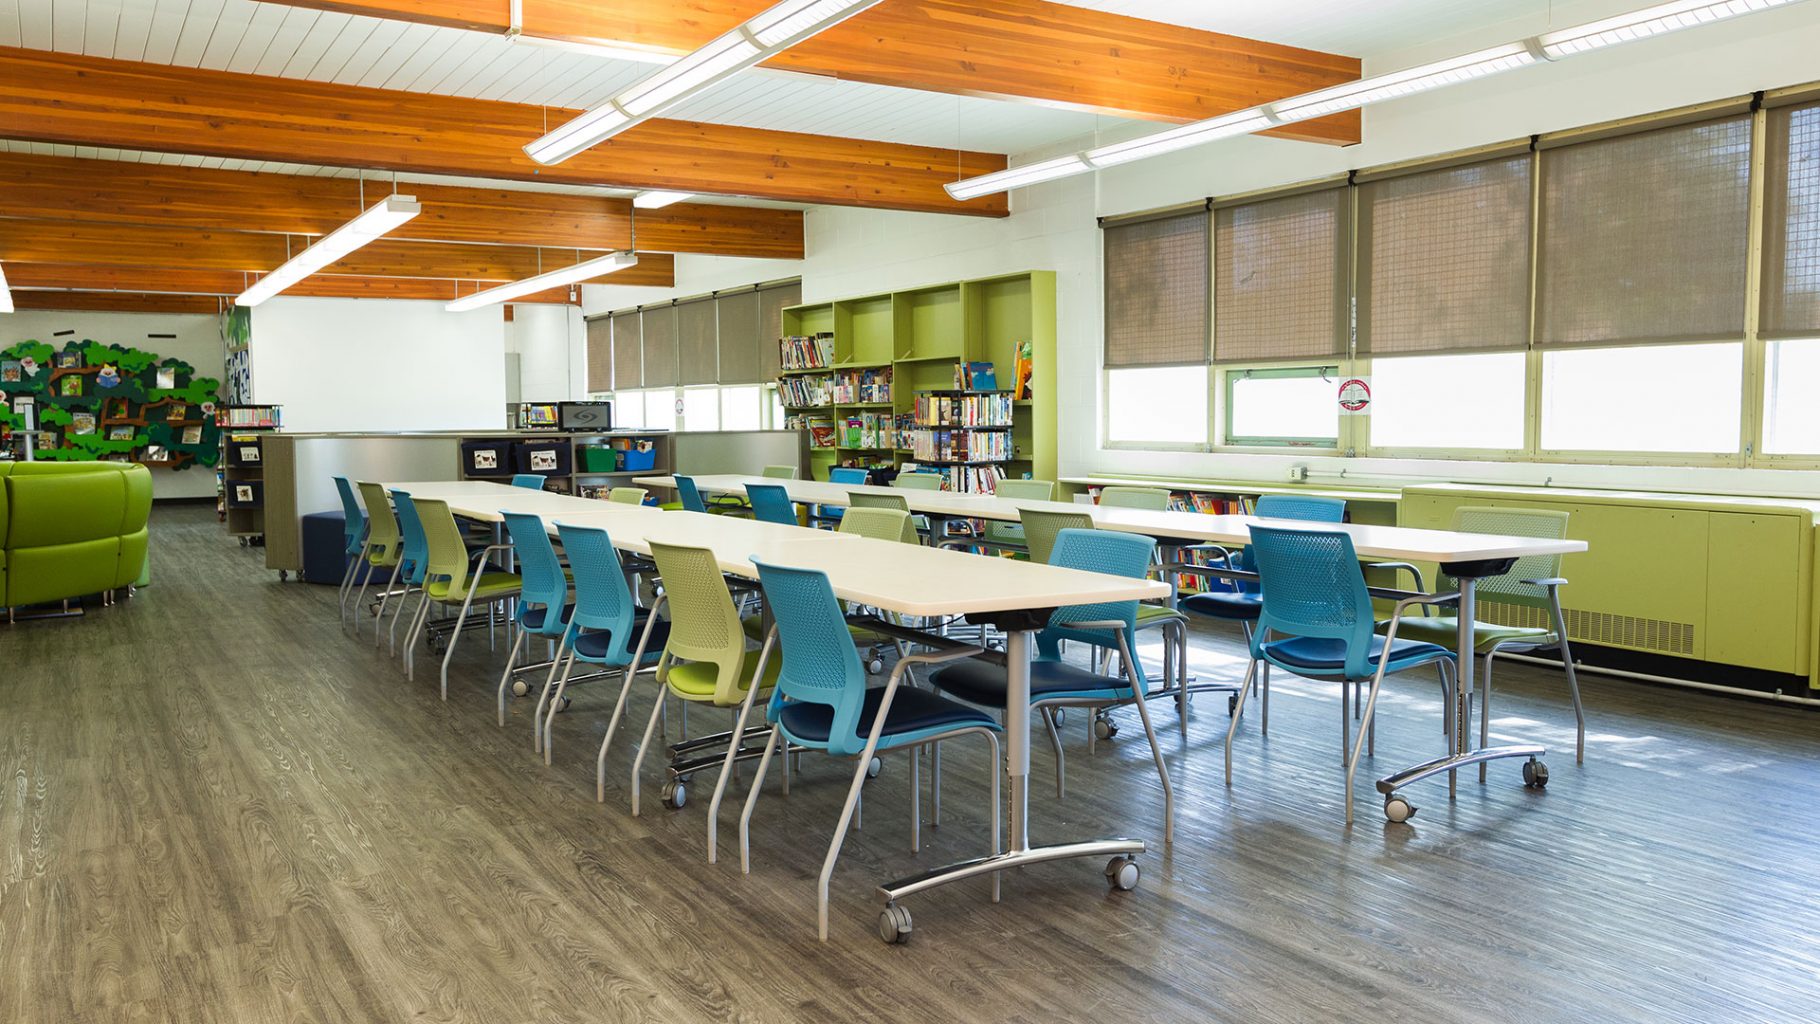 Choosing School Furniture To Support Quality Education